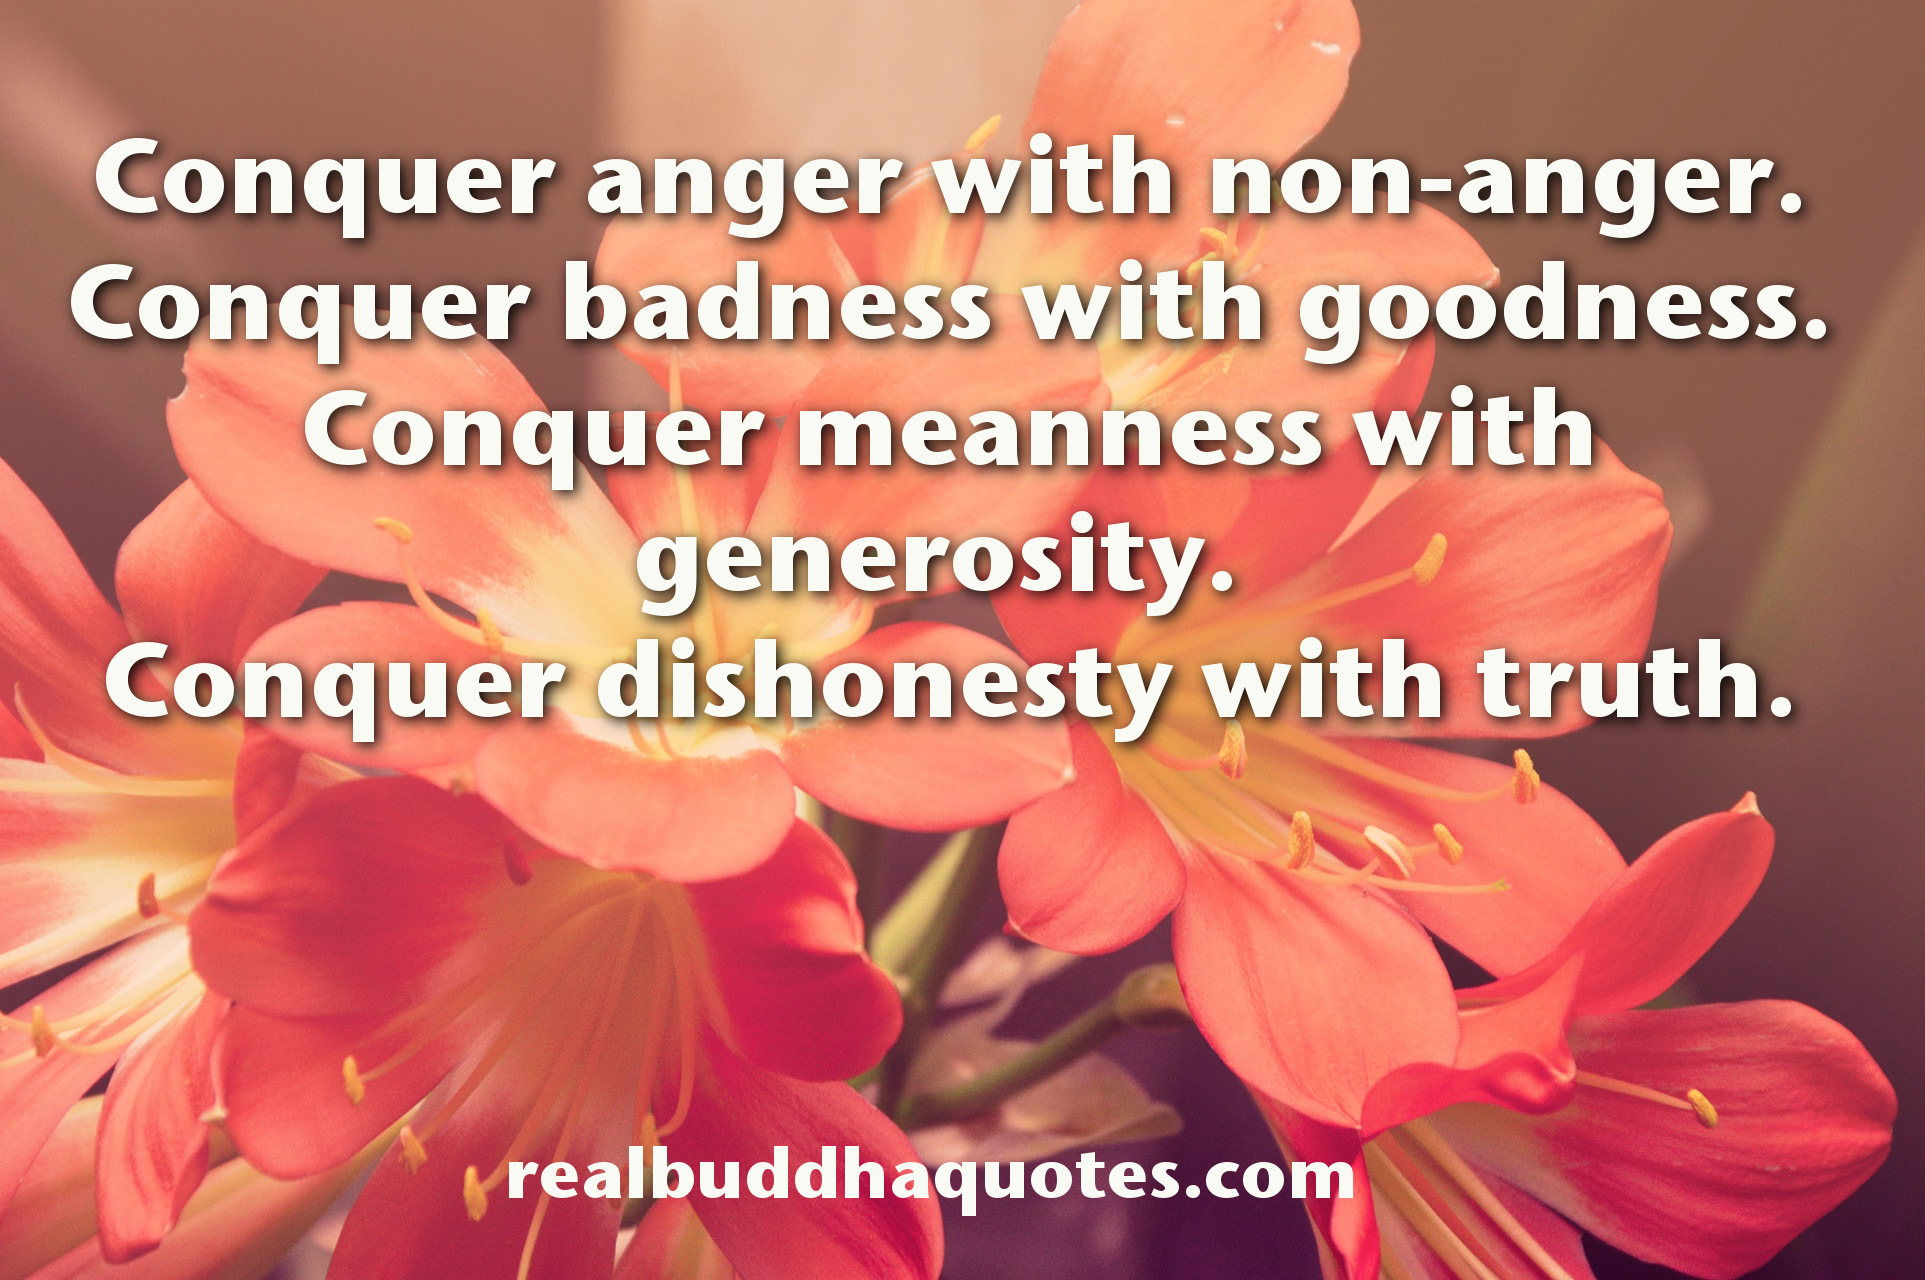 conquer-anger-with-non-anger.jpg